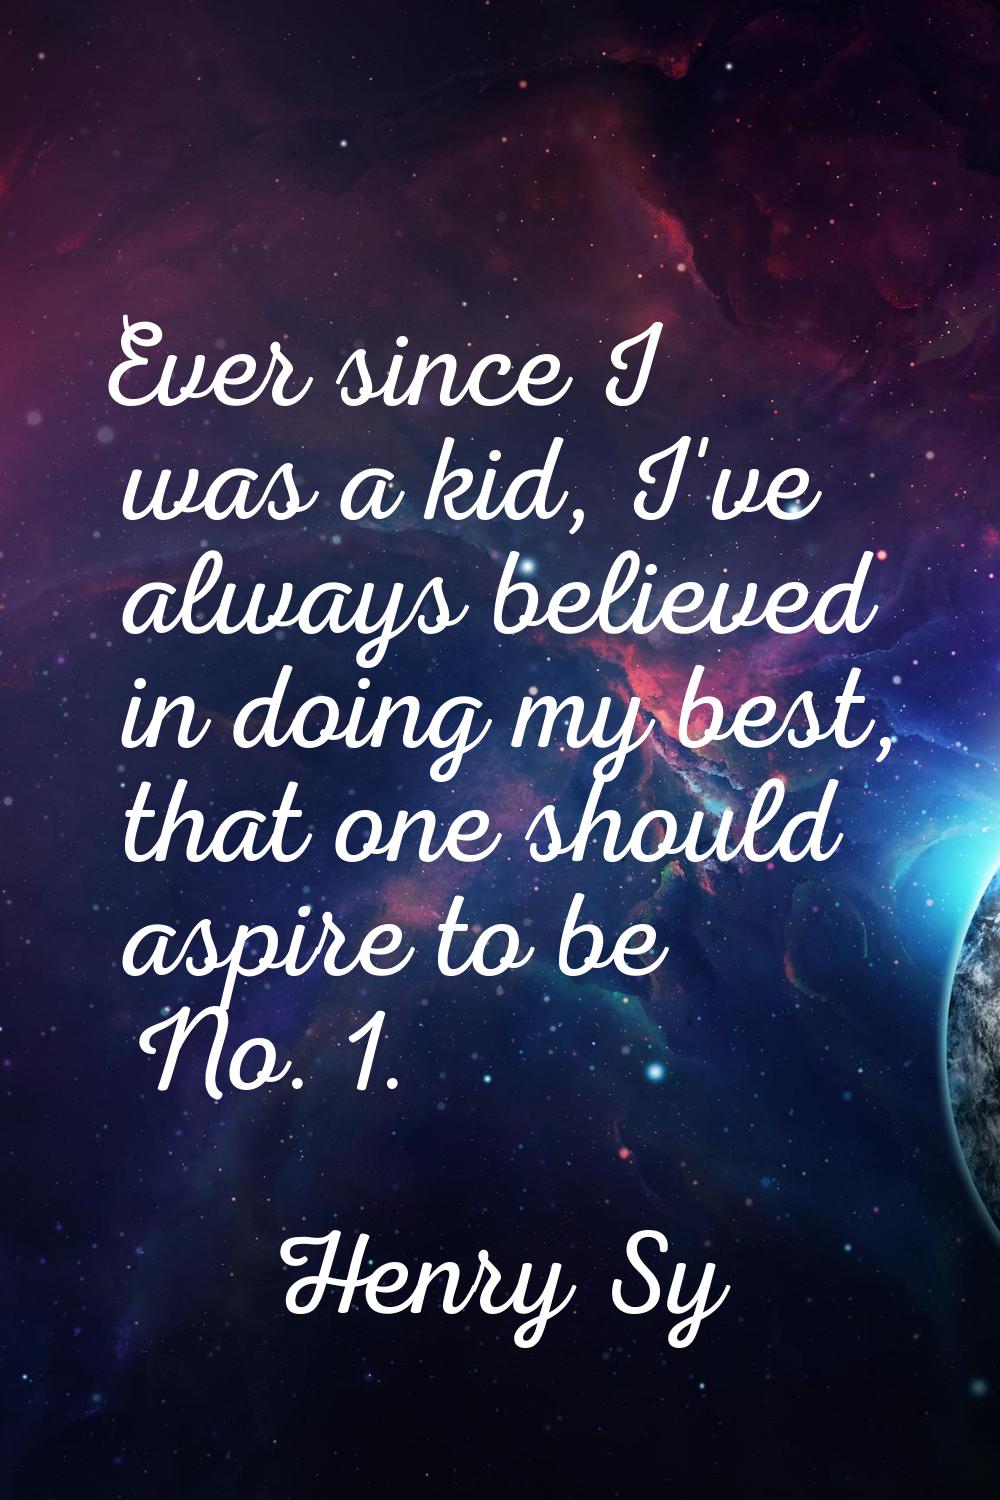 Ever since I was a kid, I've always believed in doing my best, that one should aspire to be No. 1.